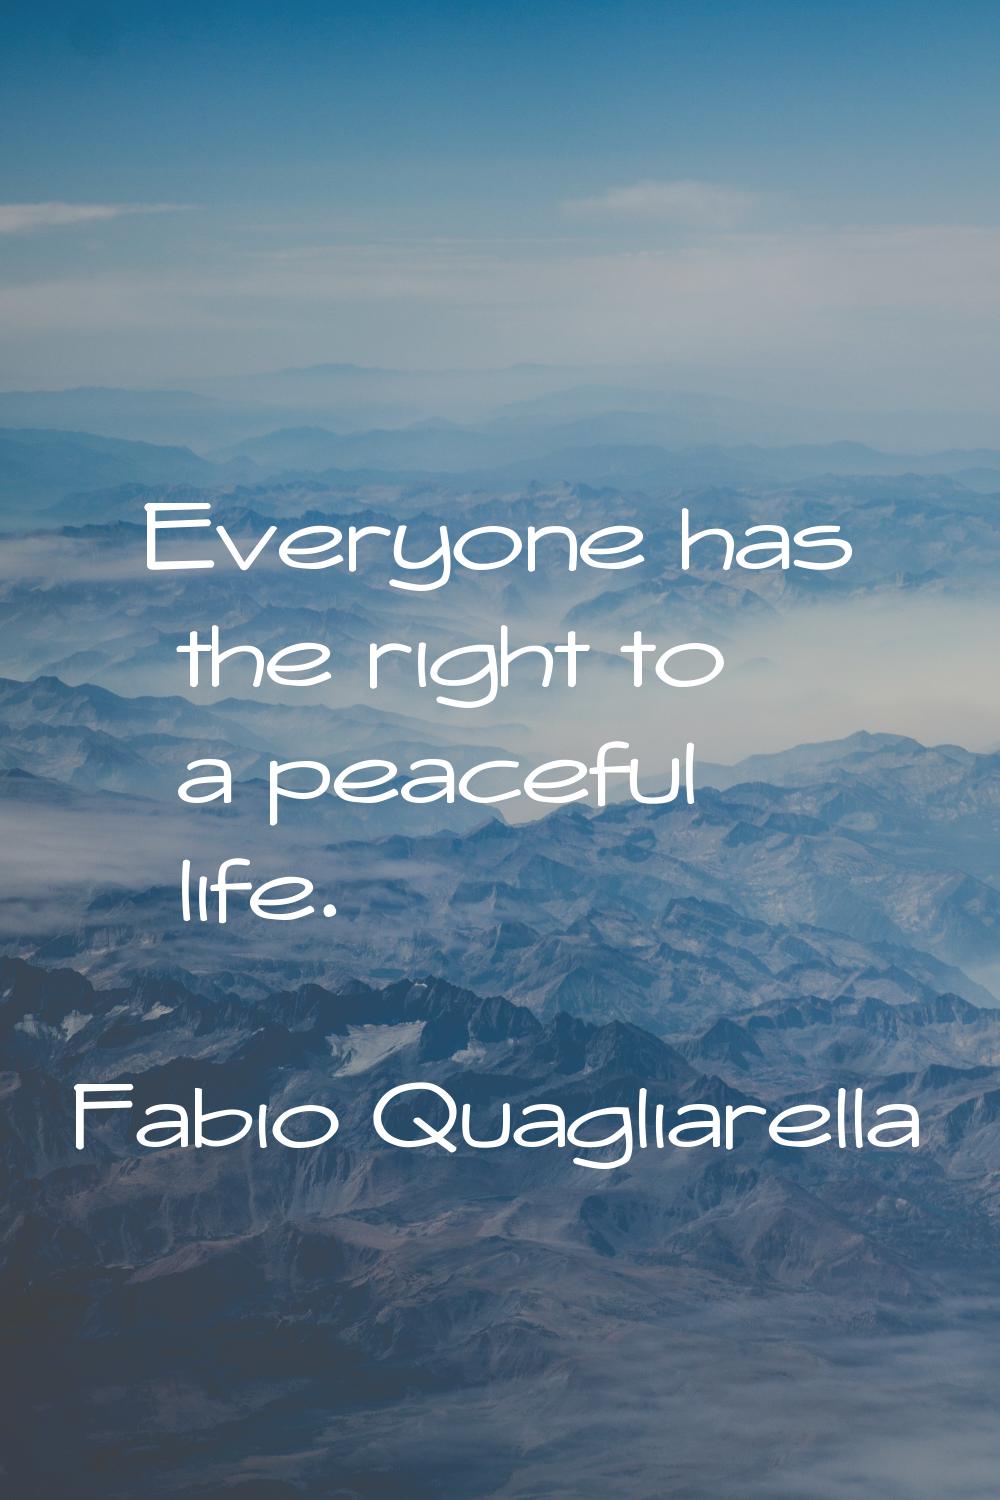 Everyone has the right to a peaceful life.